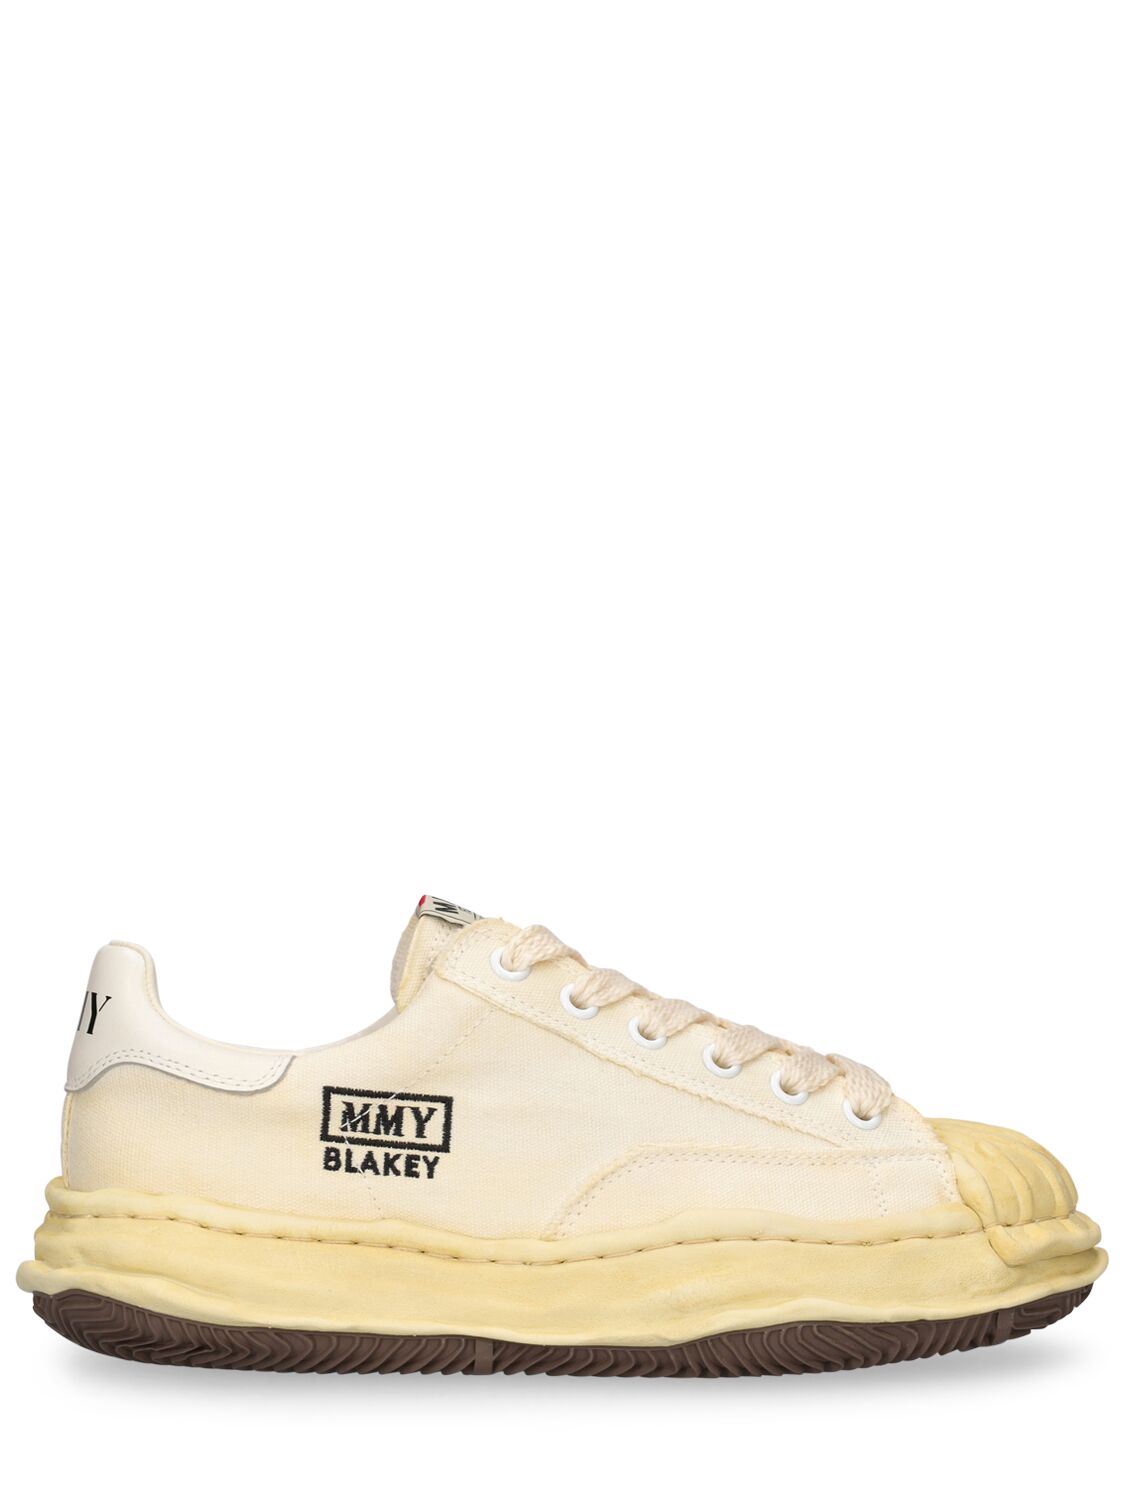 Image of Blakey Canvas Low-top Sneakers